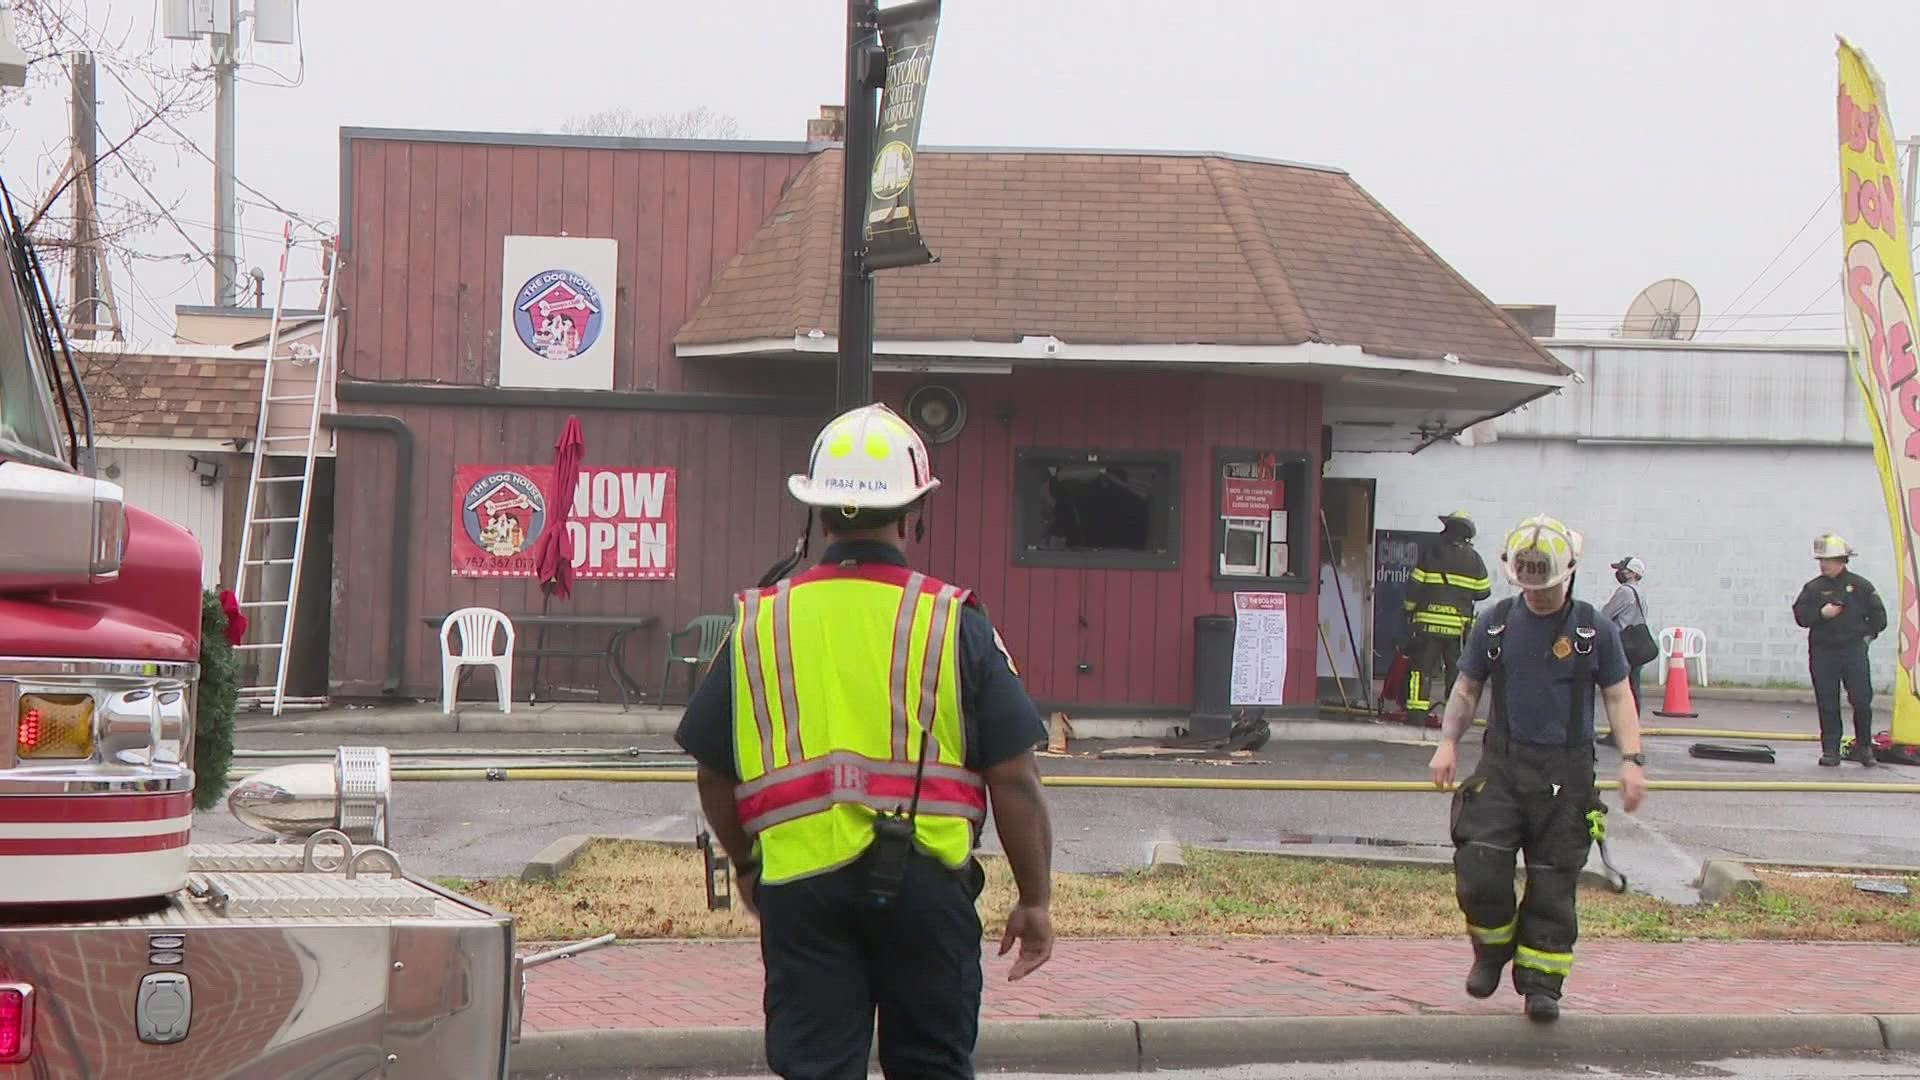 The South Norfolk restaurant caught fire on Thursday morning. No injuries are reported.